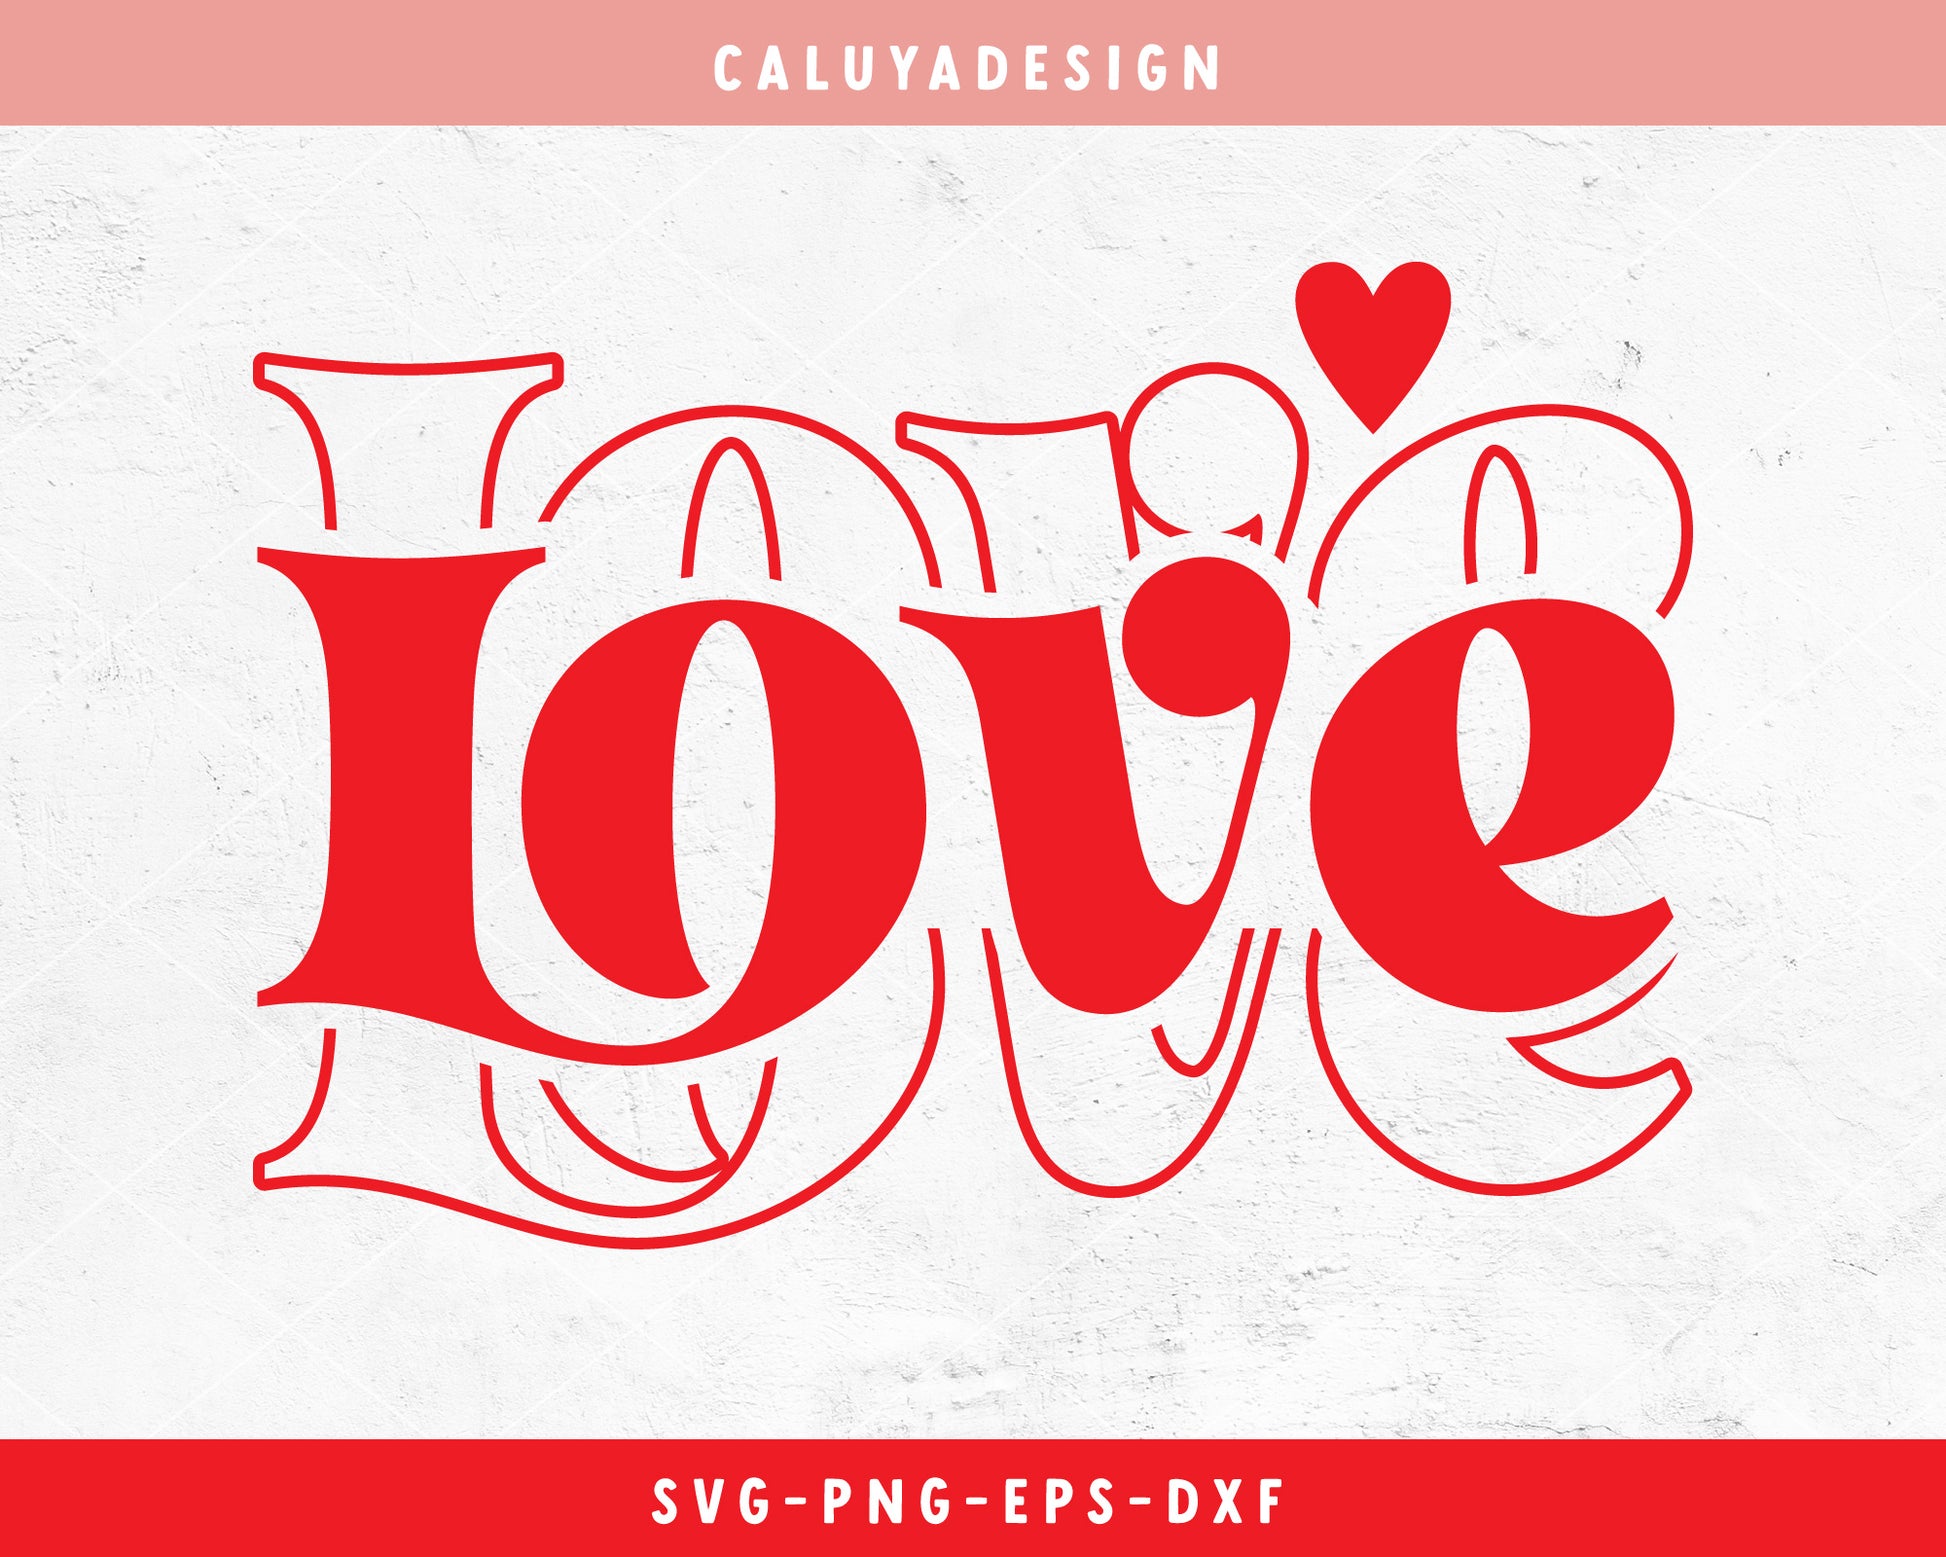 Valentine's Day SVG, Balloon, String, Party, Up Clipart, cricut, cameo,  silhouette cut files commercial & personal use